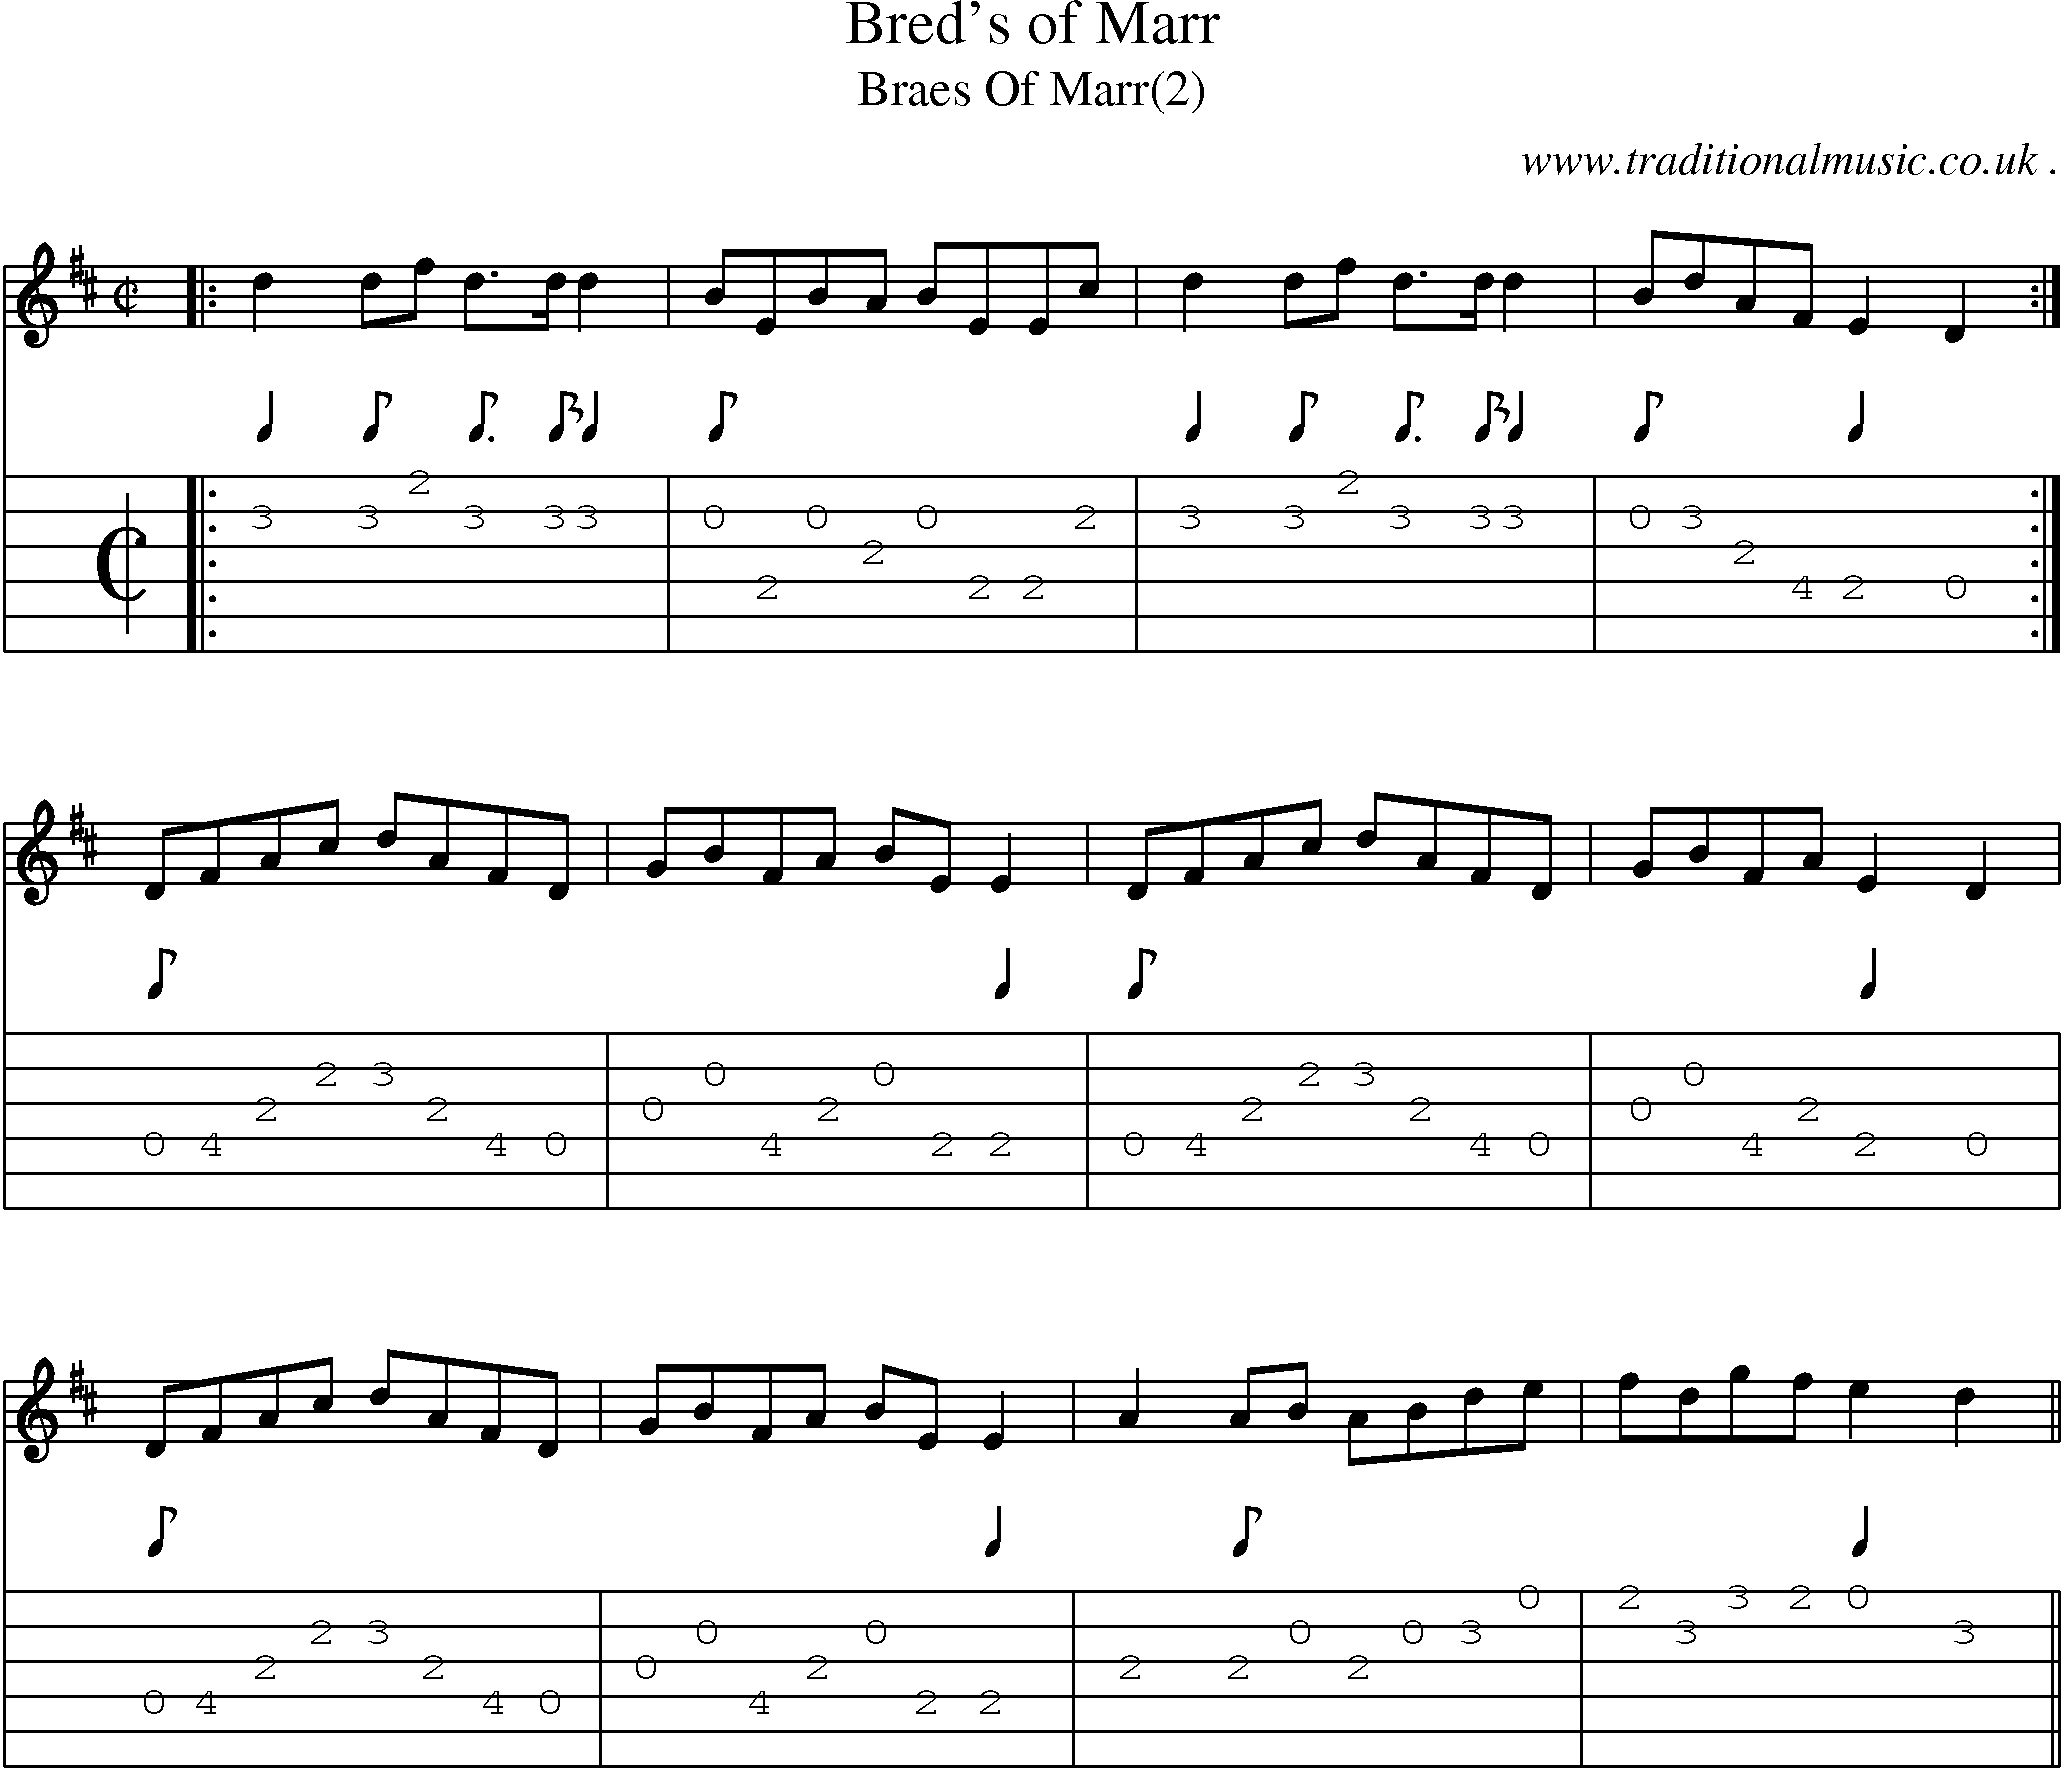 Sheet-Music and Guitar Tabs for Breds Of Marr